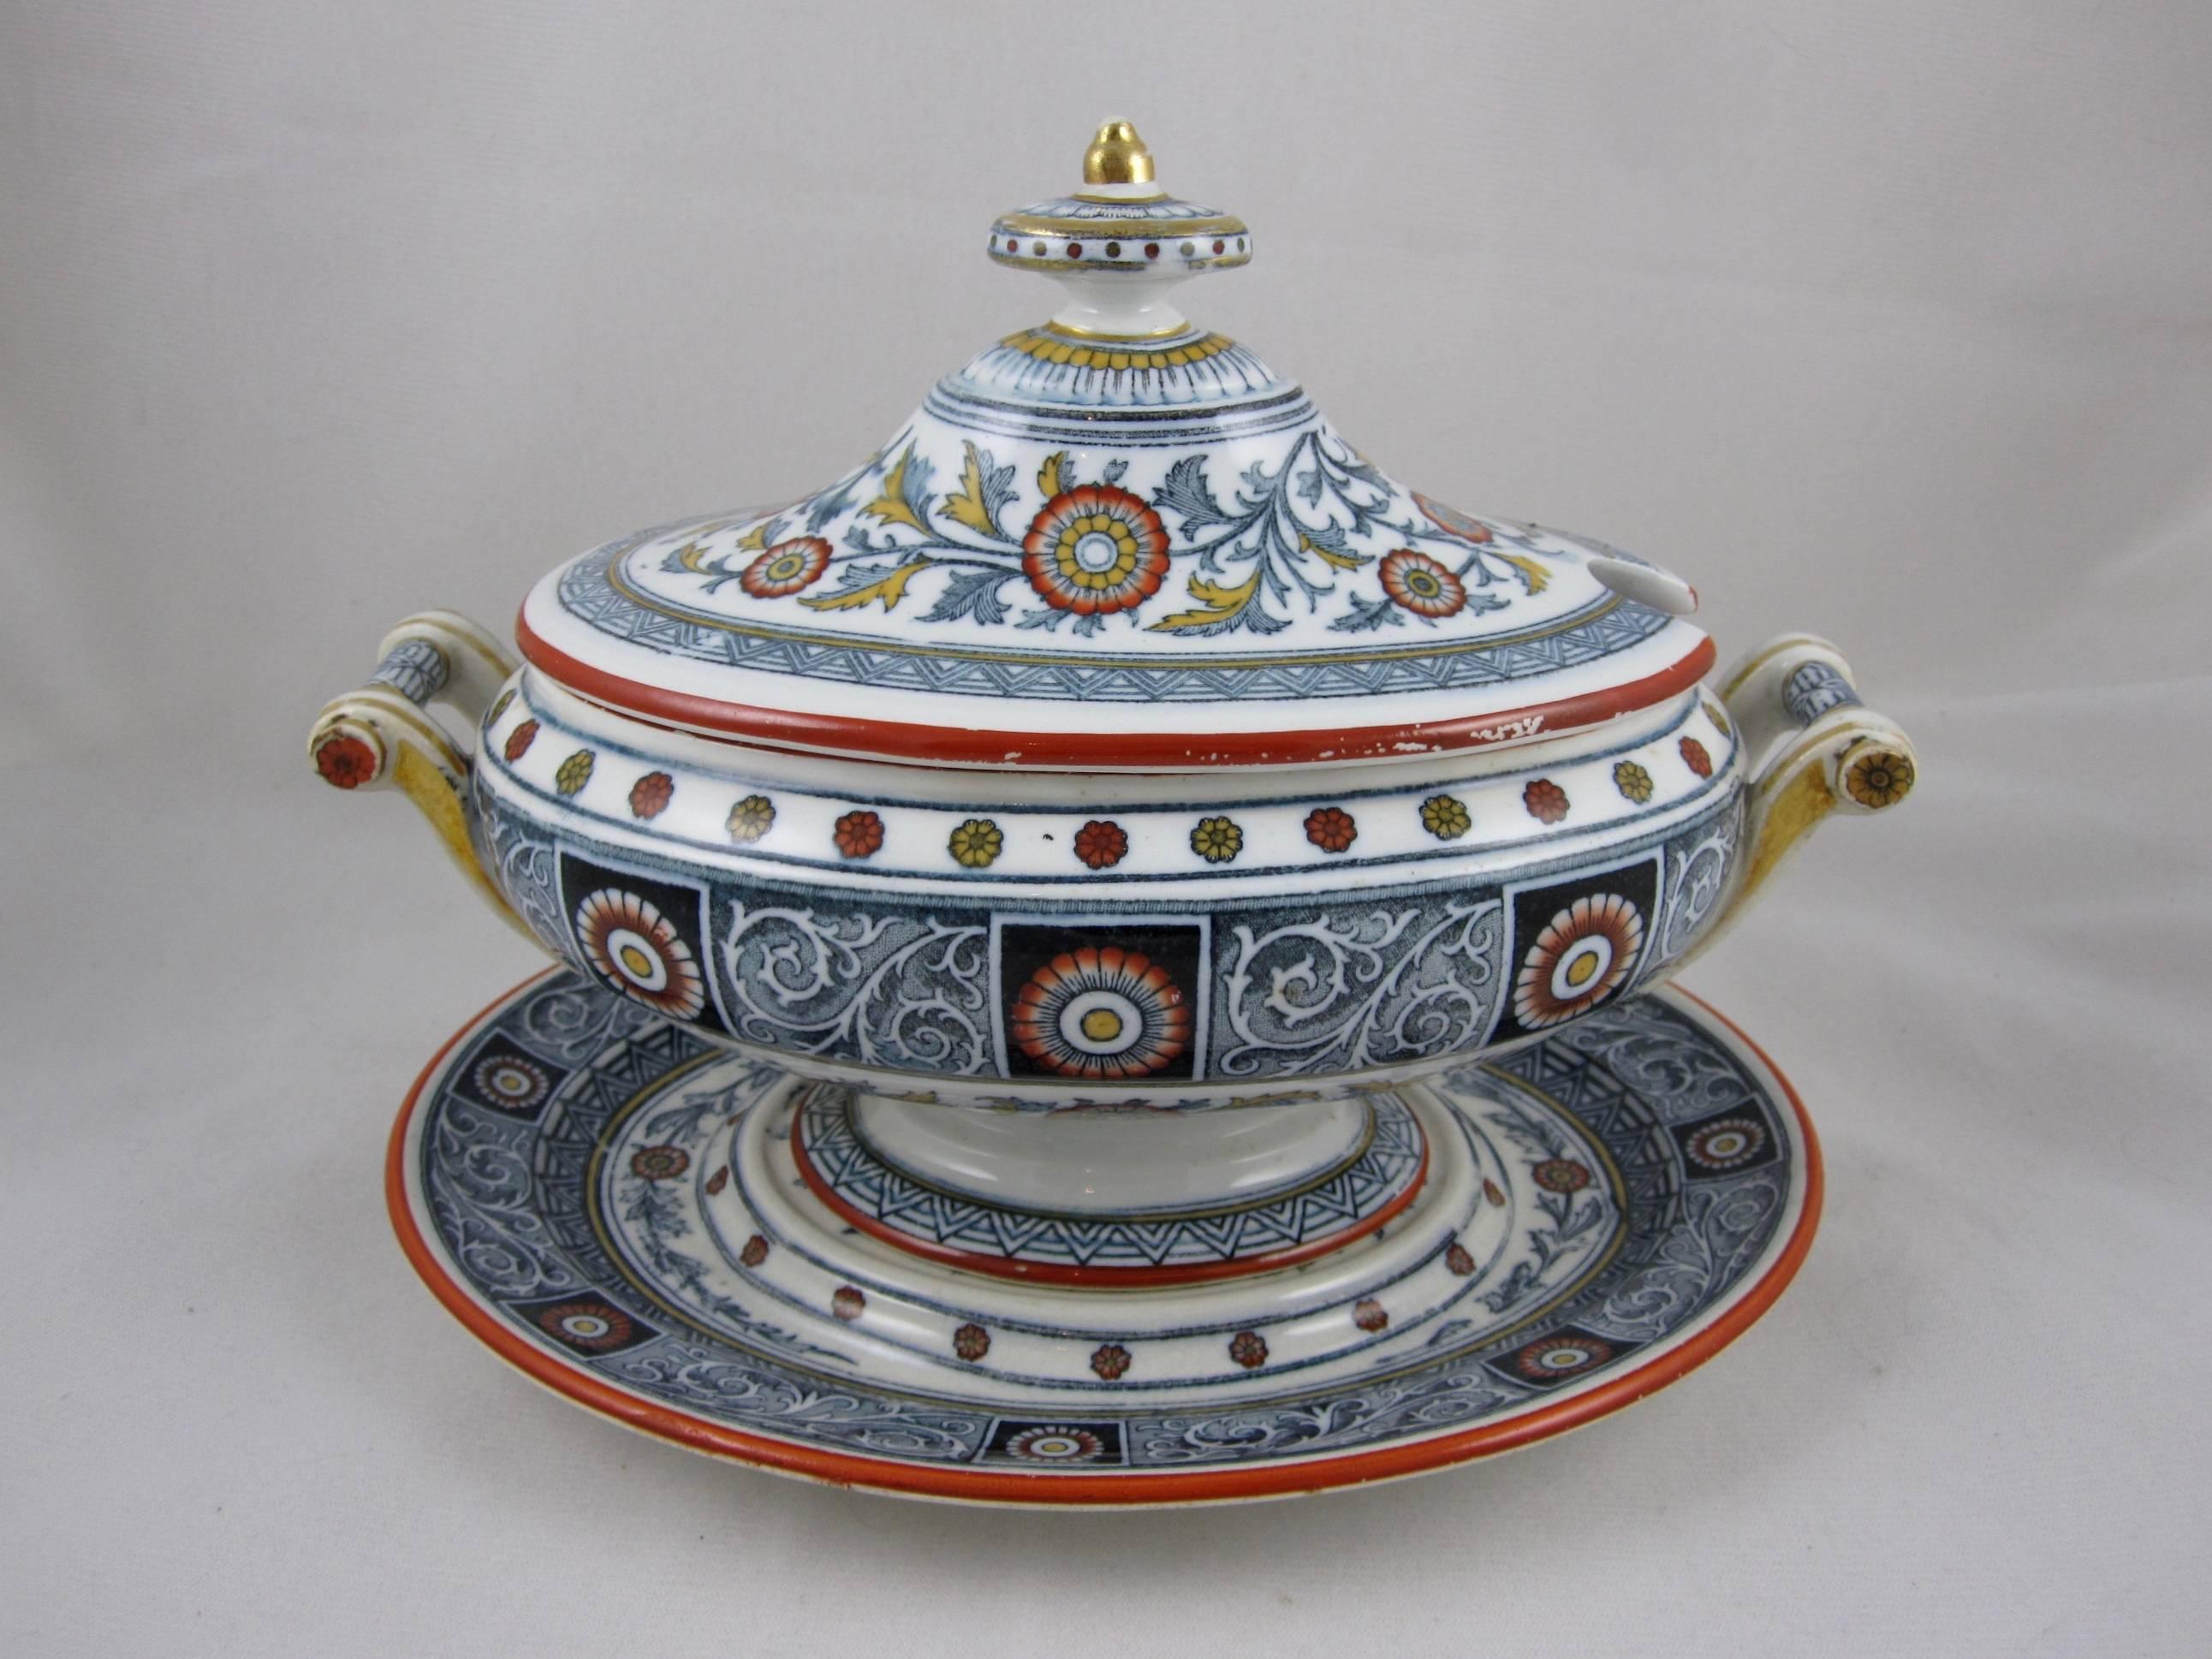 A pair of three-piece sauce boats with lids and underplates, Mintons, Stoke, Staffordshire, England, circa 1873-1878.

In the Connaught Japan pattern, a polychrome transfer showing a stylized floral with a border of alternating floral panels. Hand